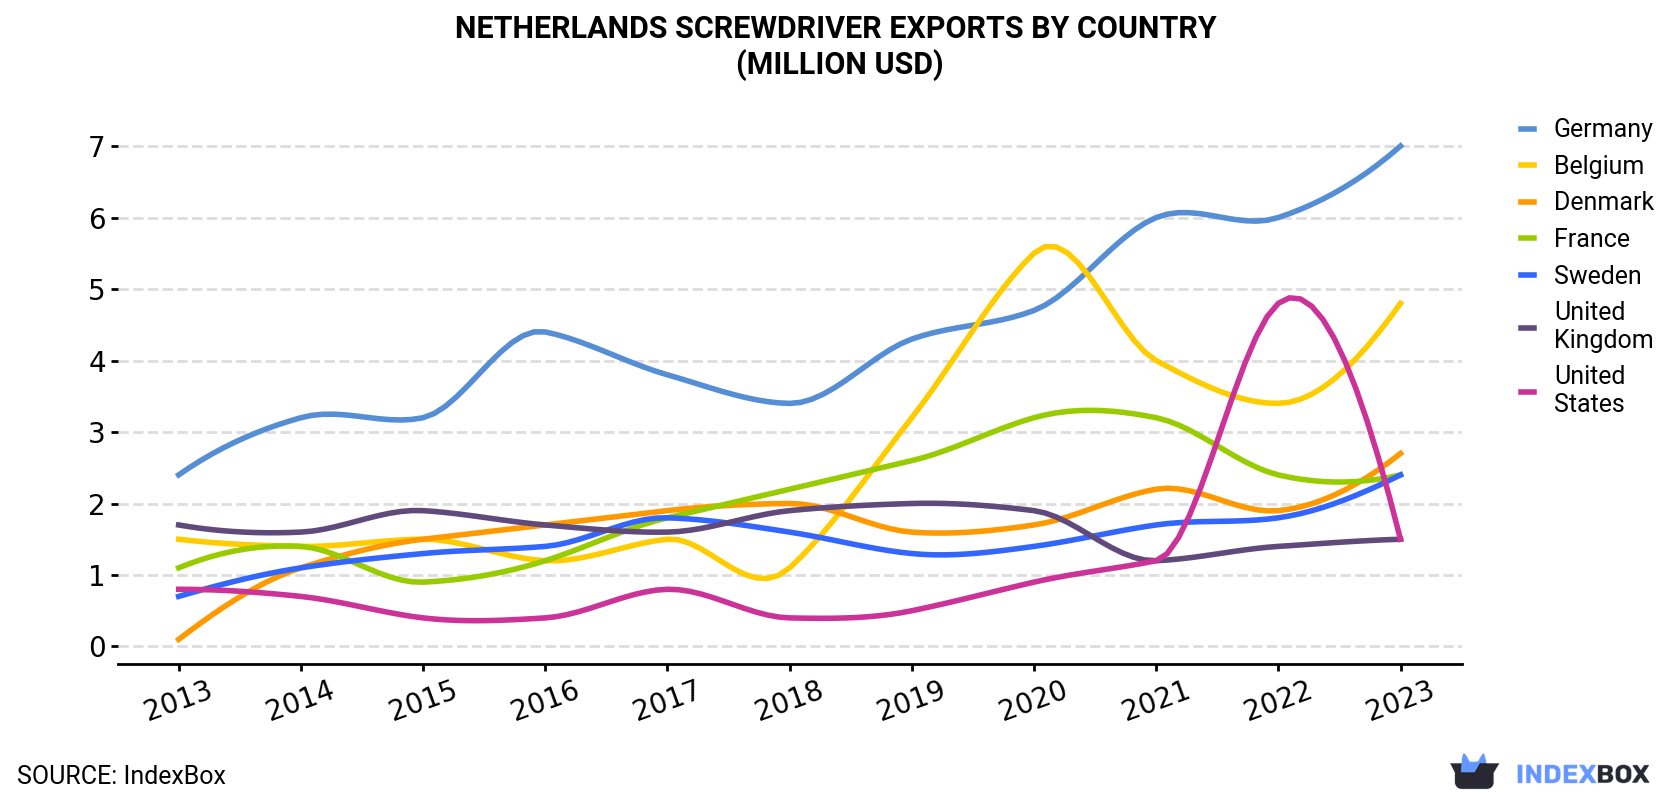 Netherlands Screwdriver Exports By Country (Million USD)